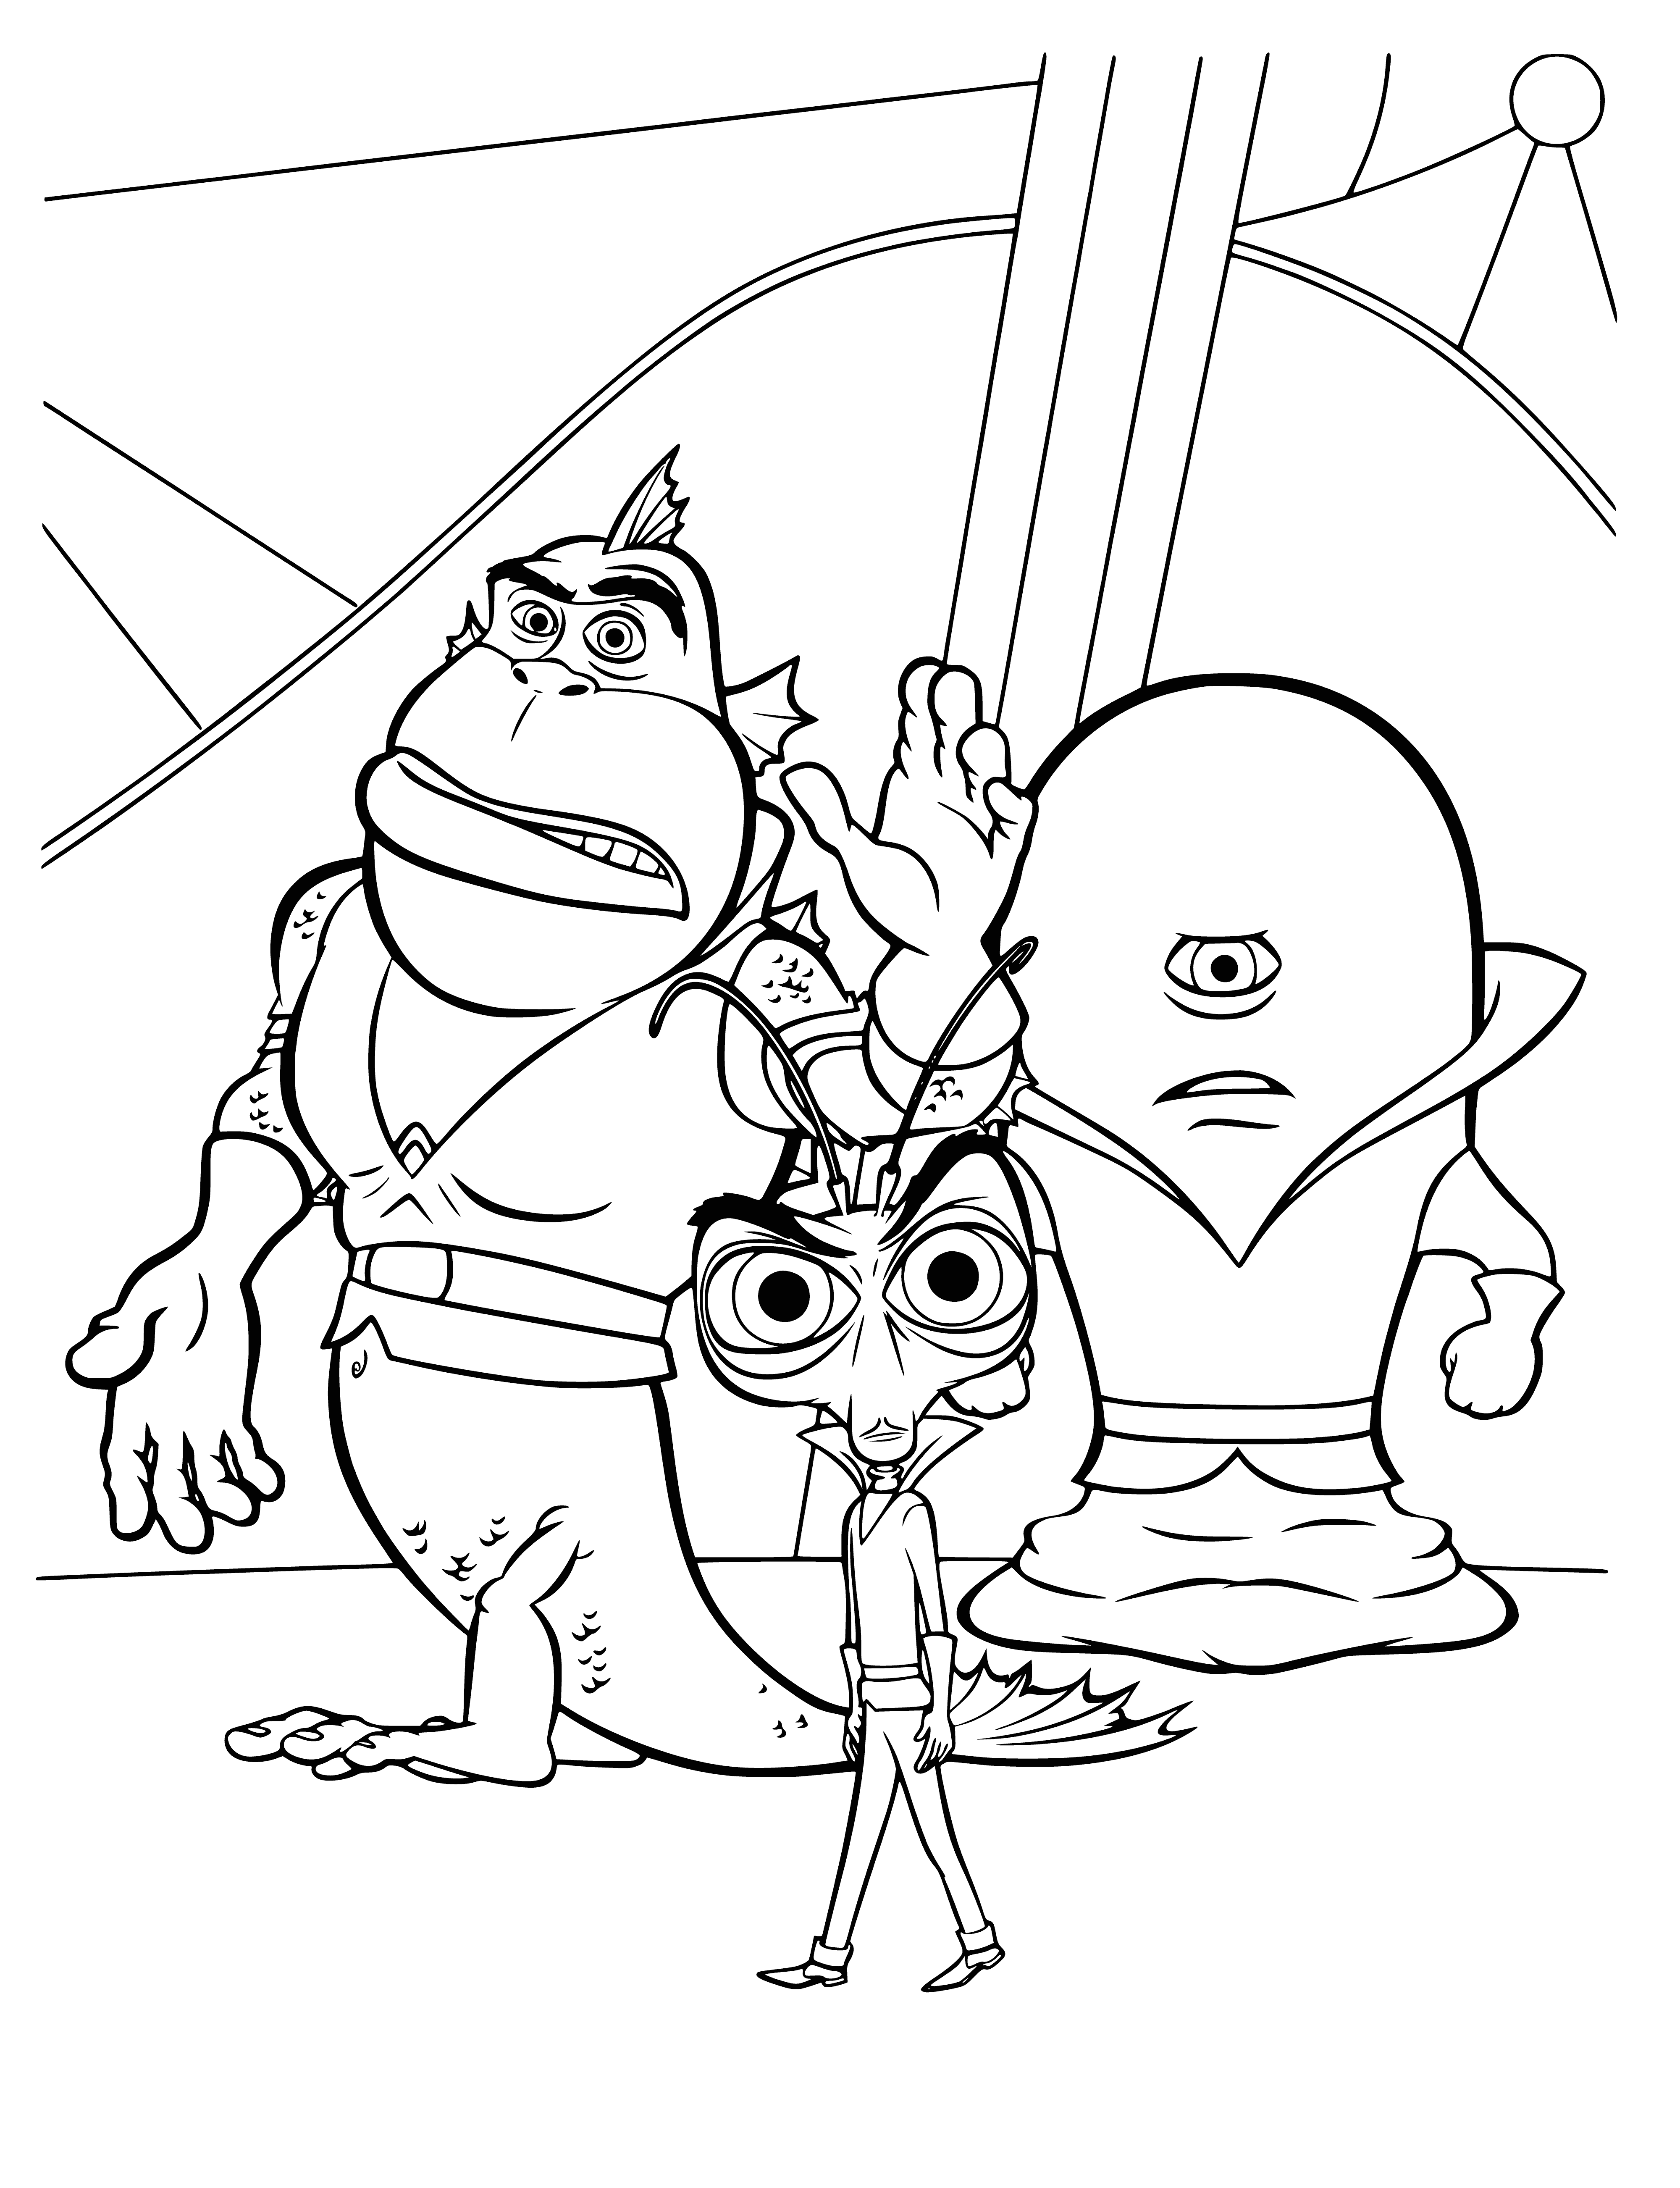 coloring page: 3 creatures with two wings fight an invisible foe atop a large lizard--an epic battle!